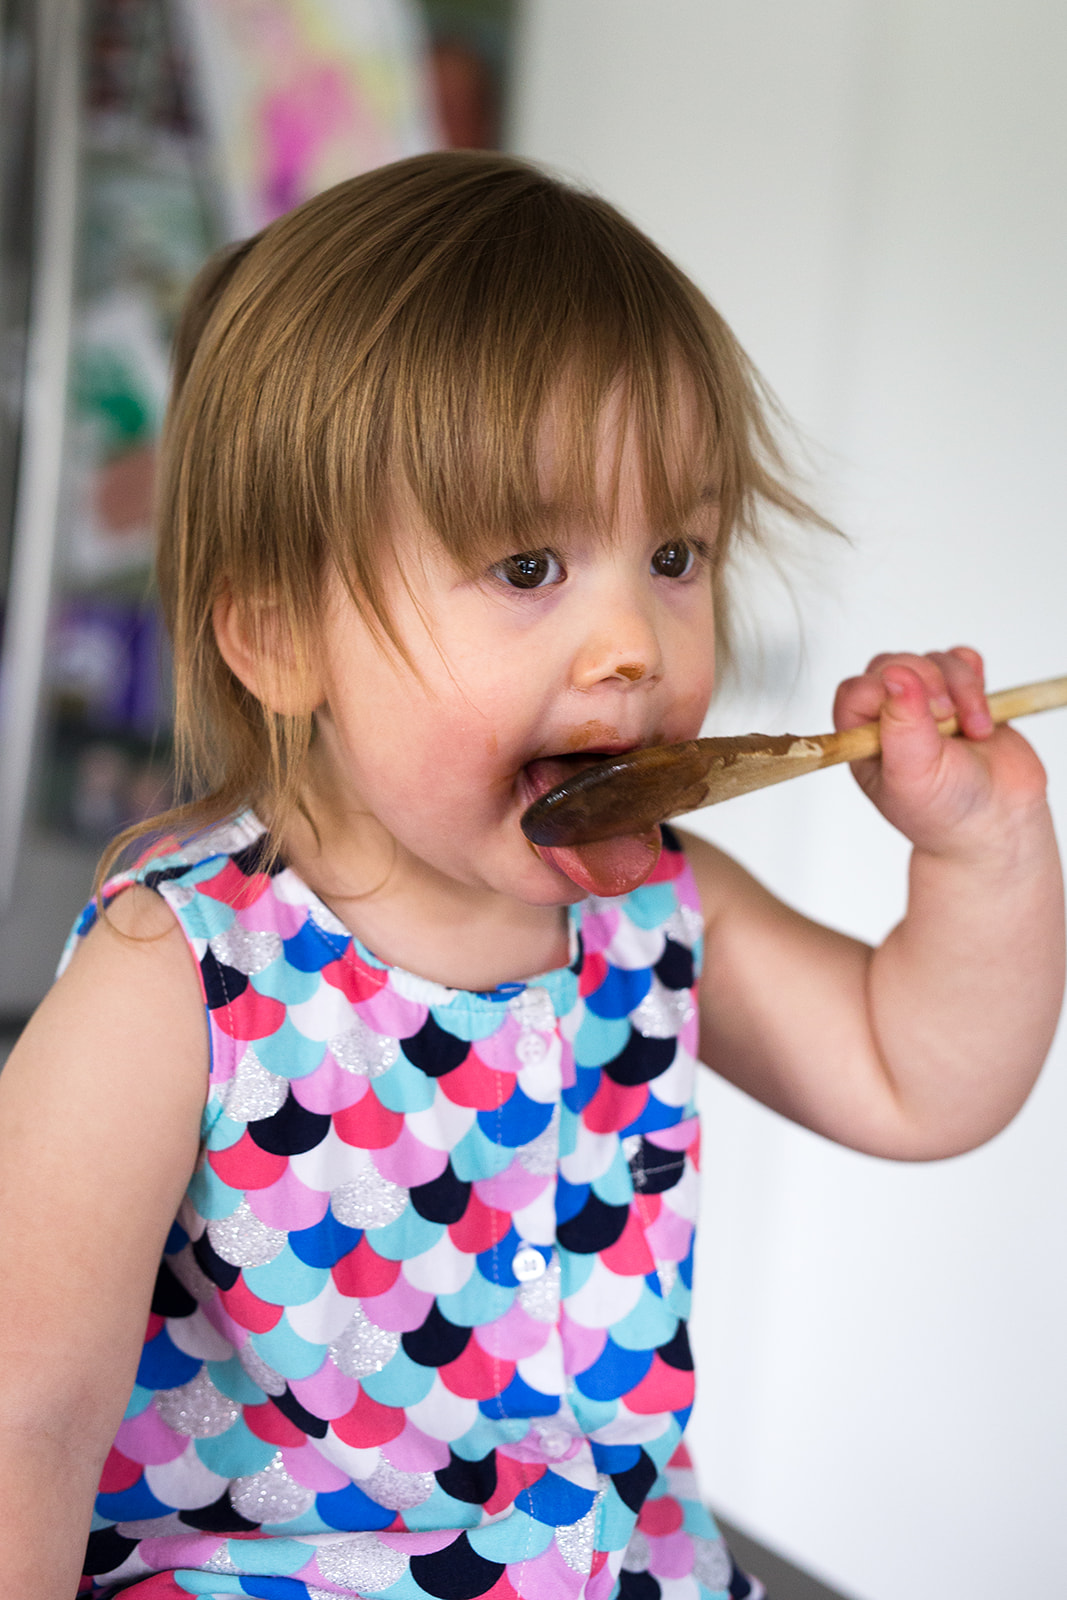 toddler eating cake batter off a wooden spoon